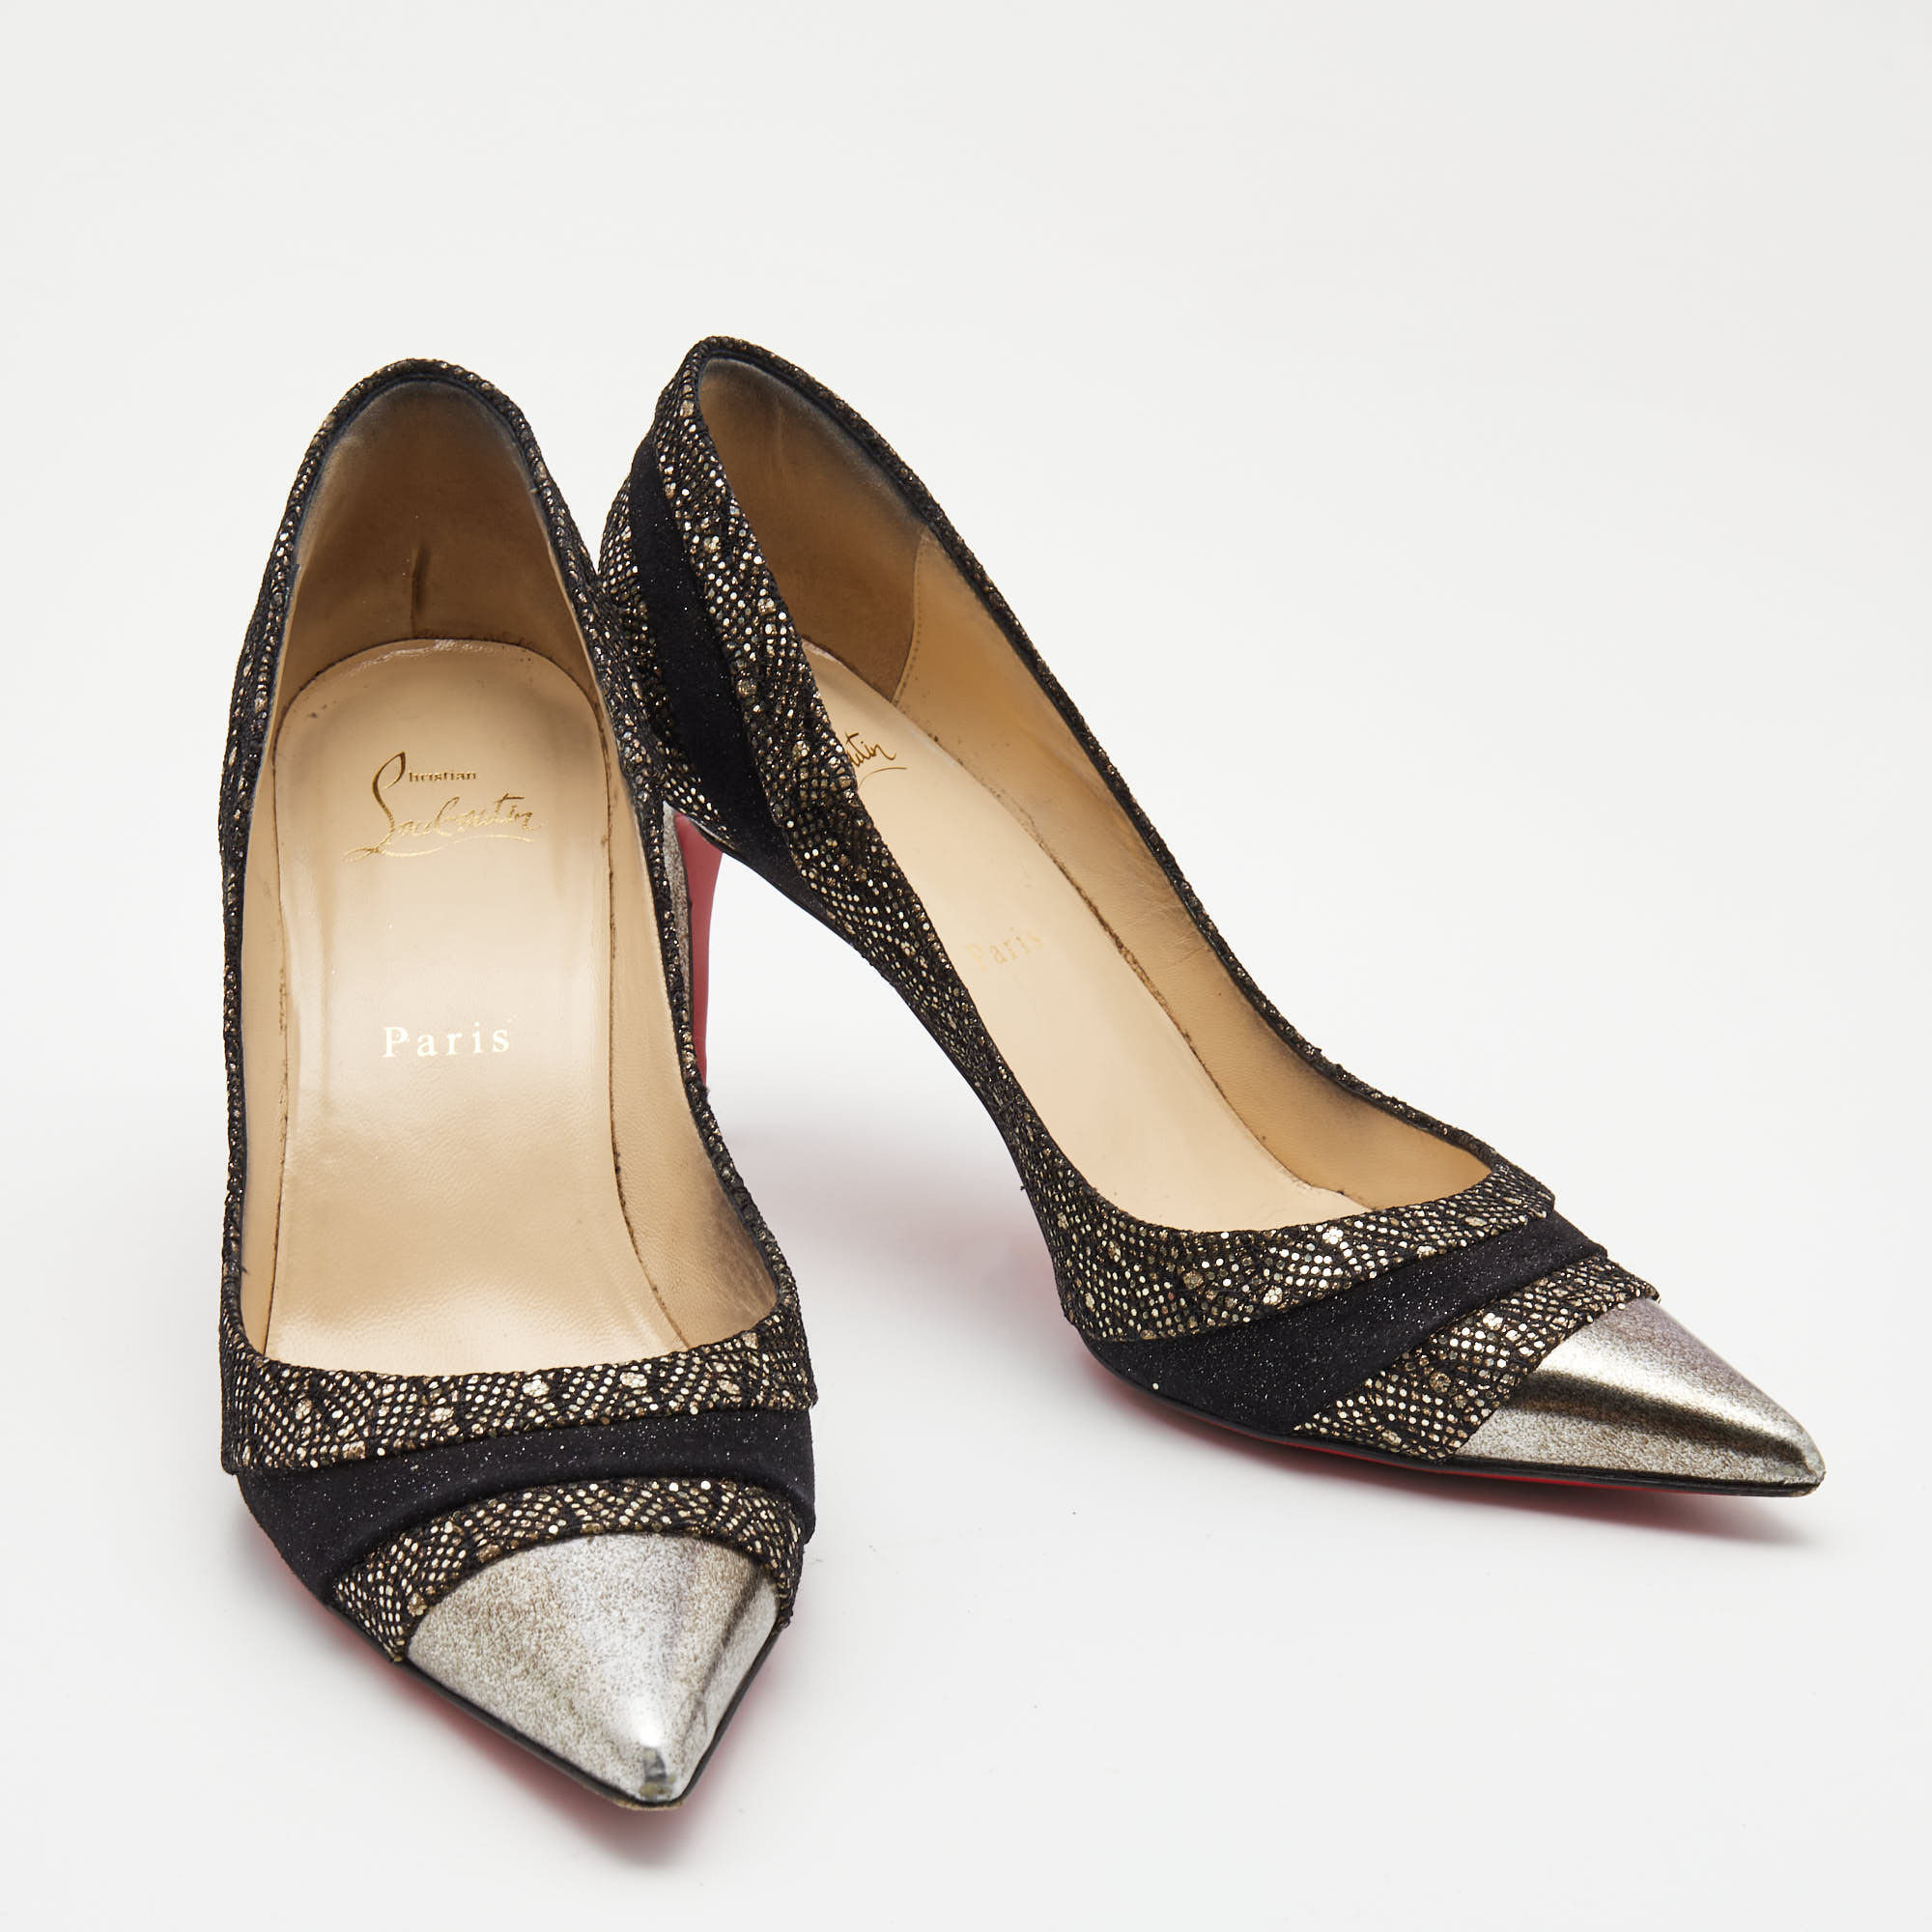 Christian Louboutin Two Tone Glitter Suede And Glitter Lace Eklectica Pumps Size 38.5